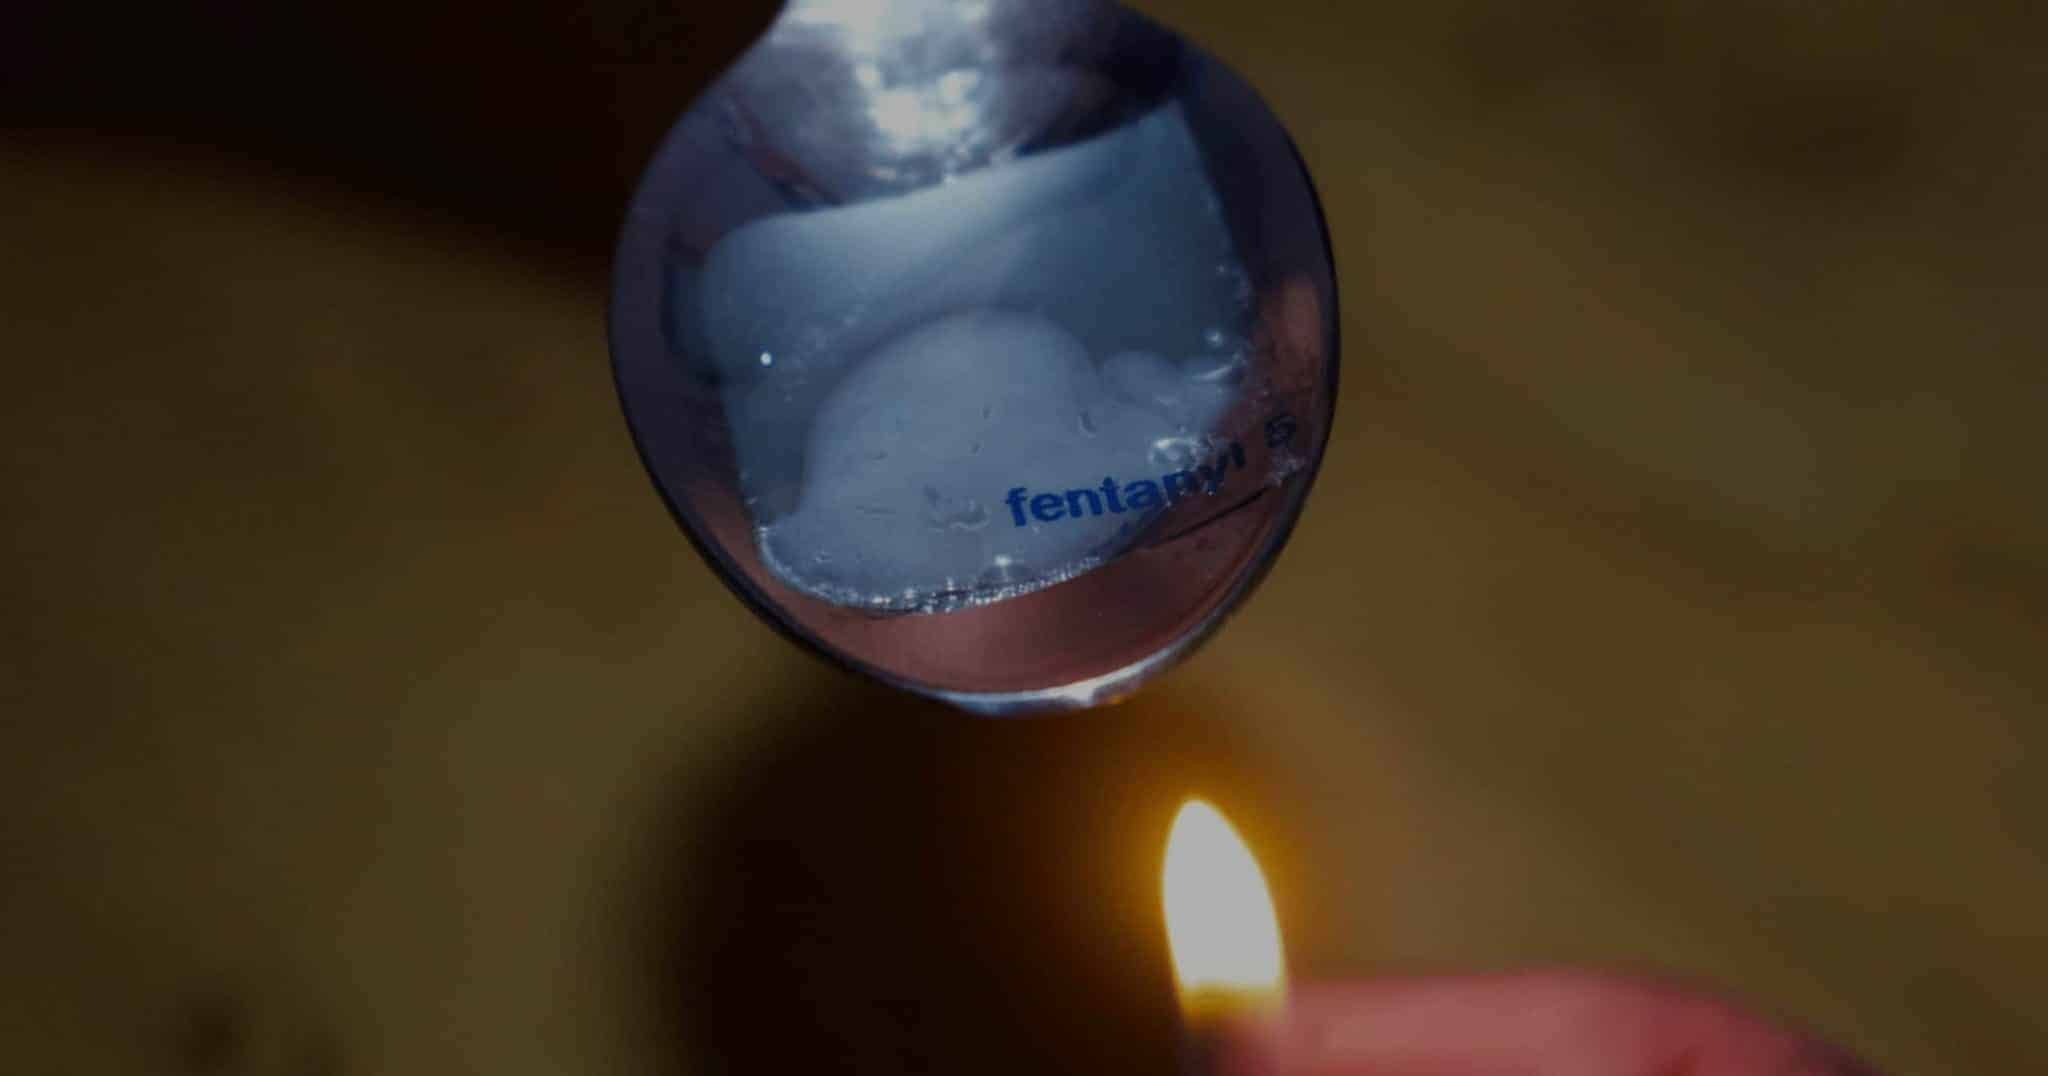 Fentanyl patch being heated on a metal spoon